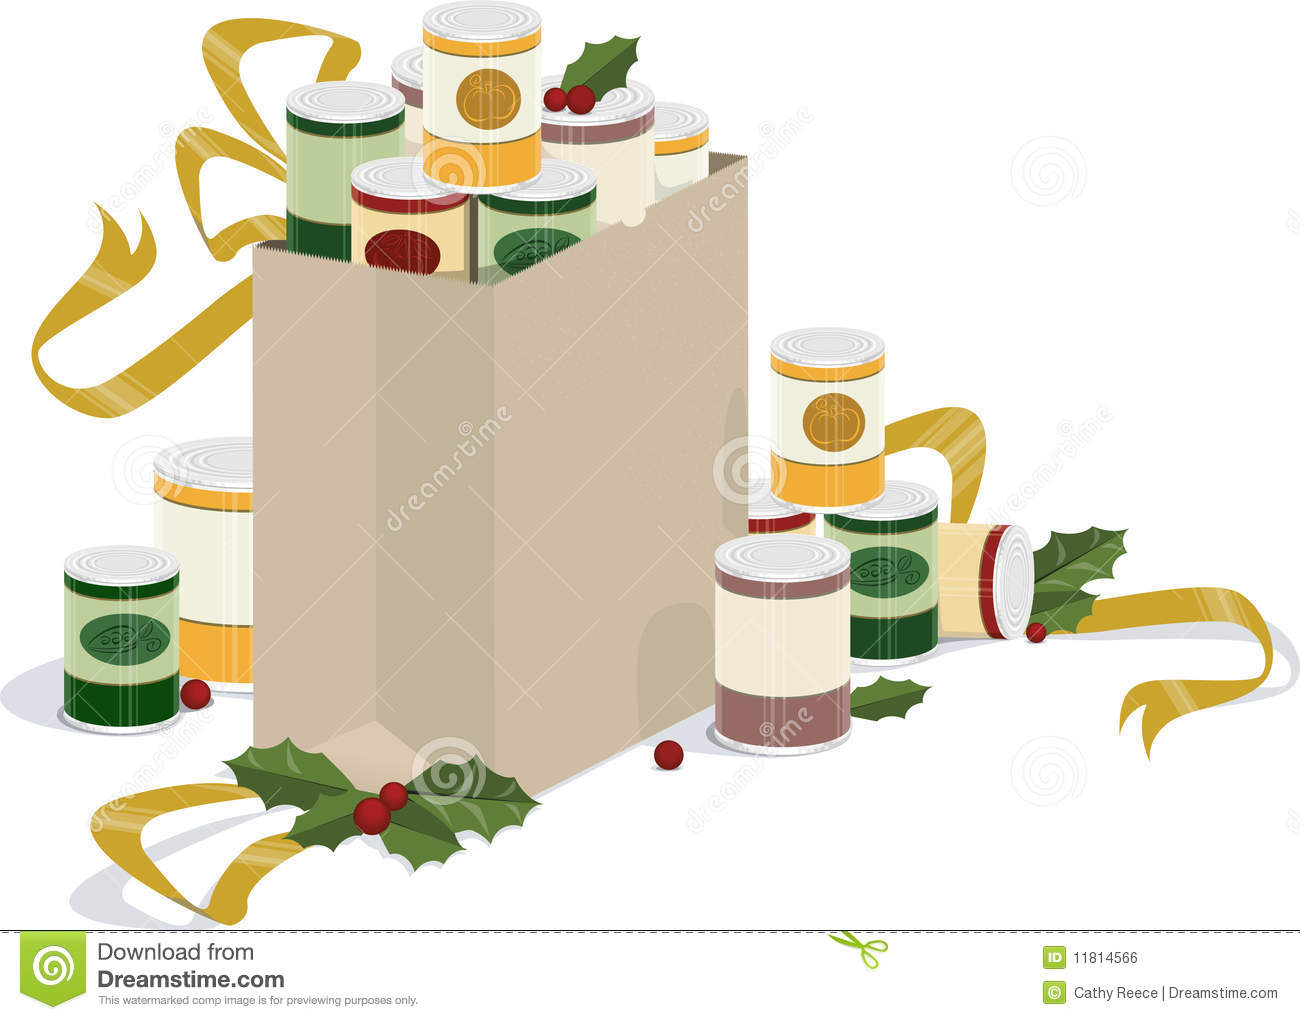 Holiday Canned Food Drive Royalty Free Stock Image   Image  11814566